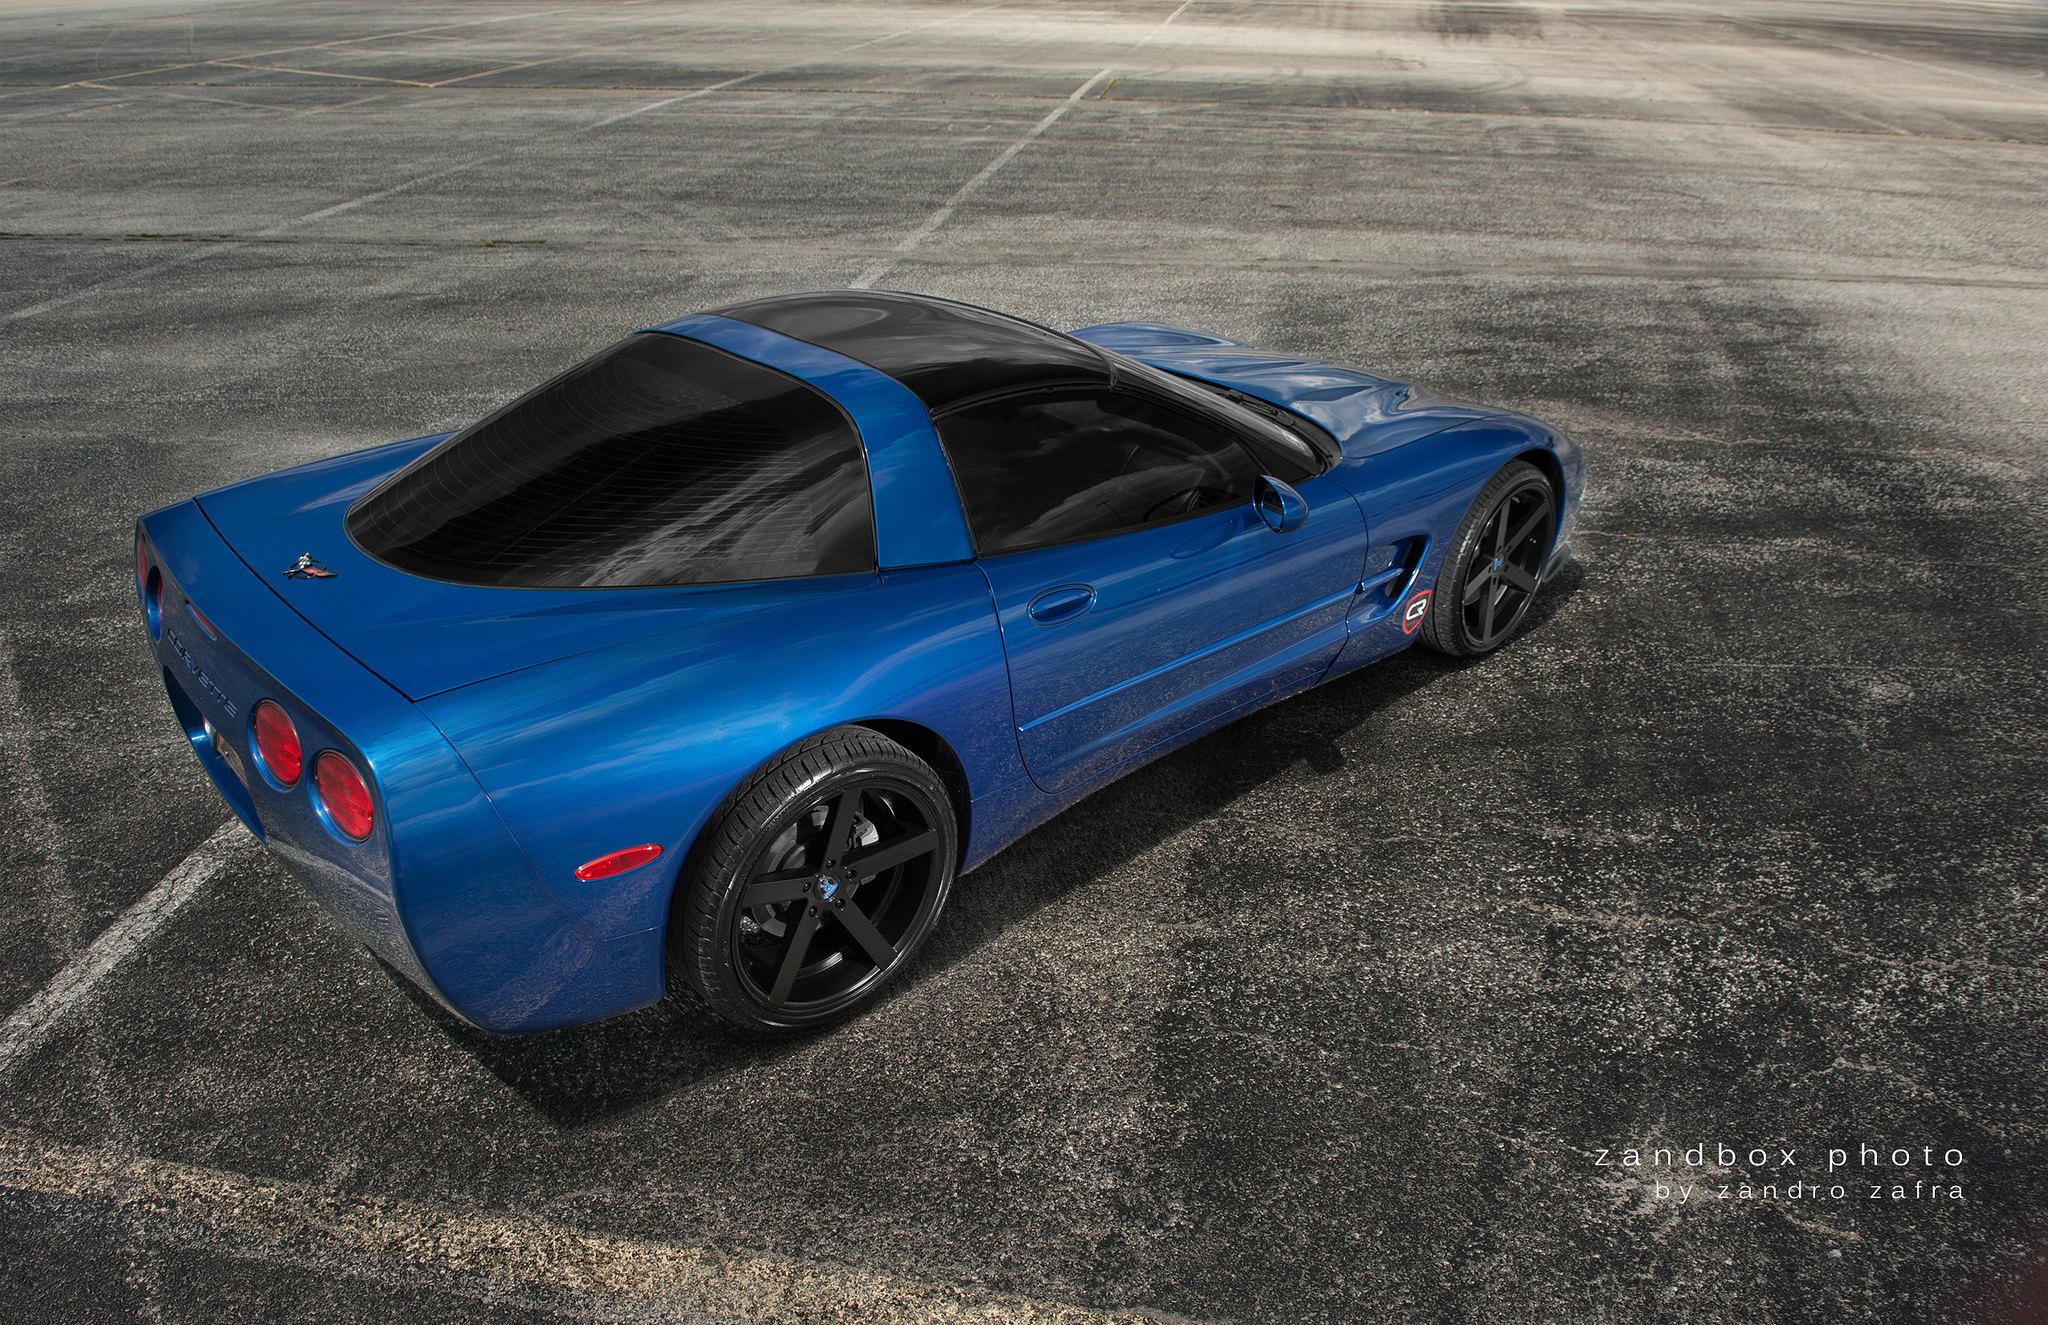 Red LED Taillights on Blue Chevy Corvette - Photo by zandbox